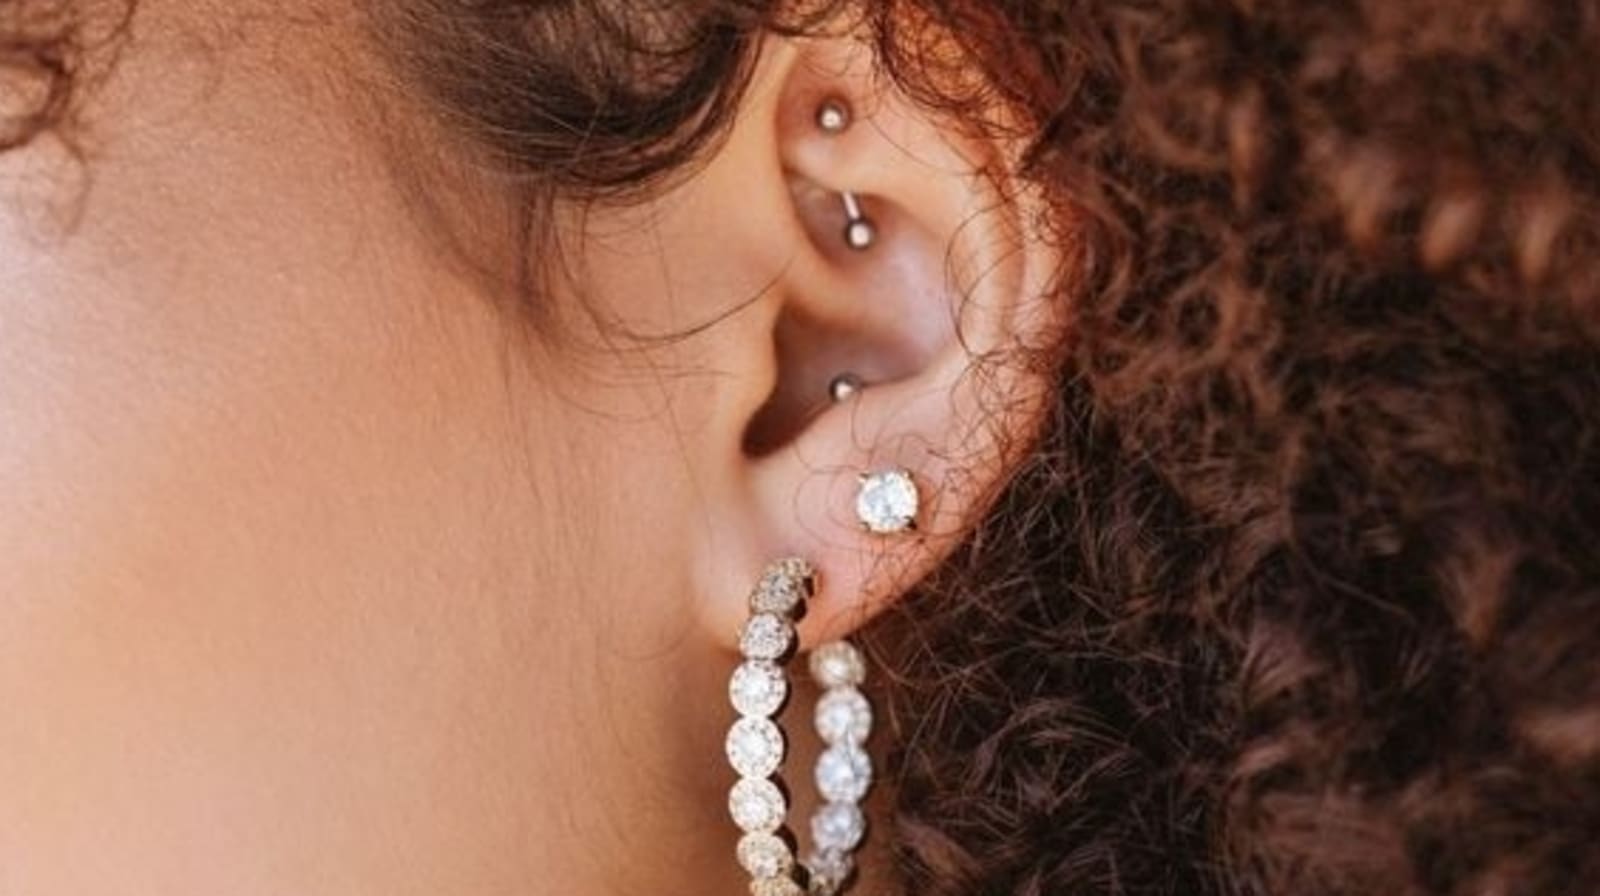 Piercings To Avoid Infection